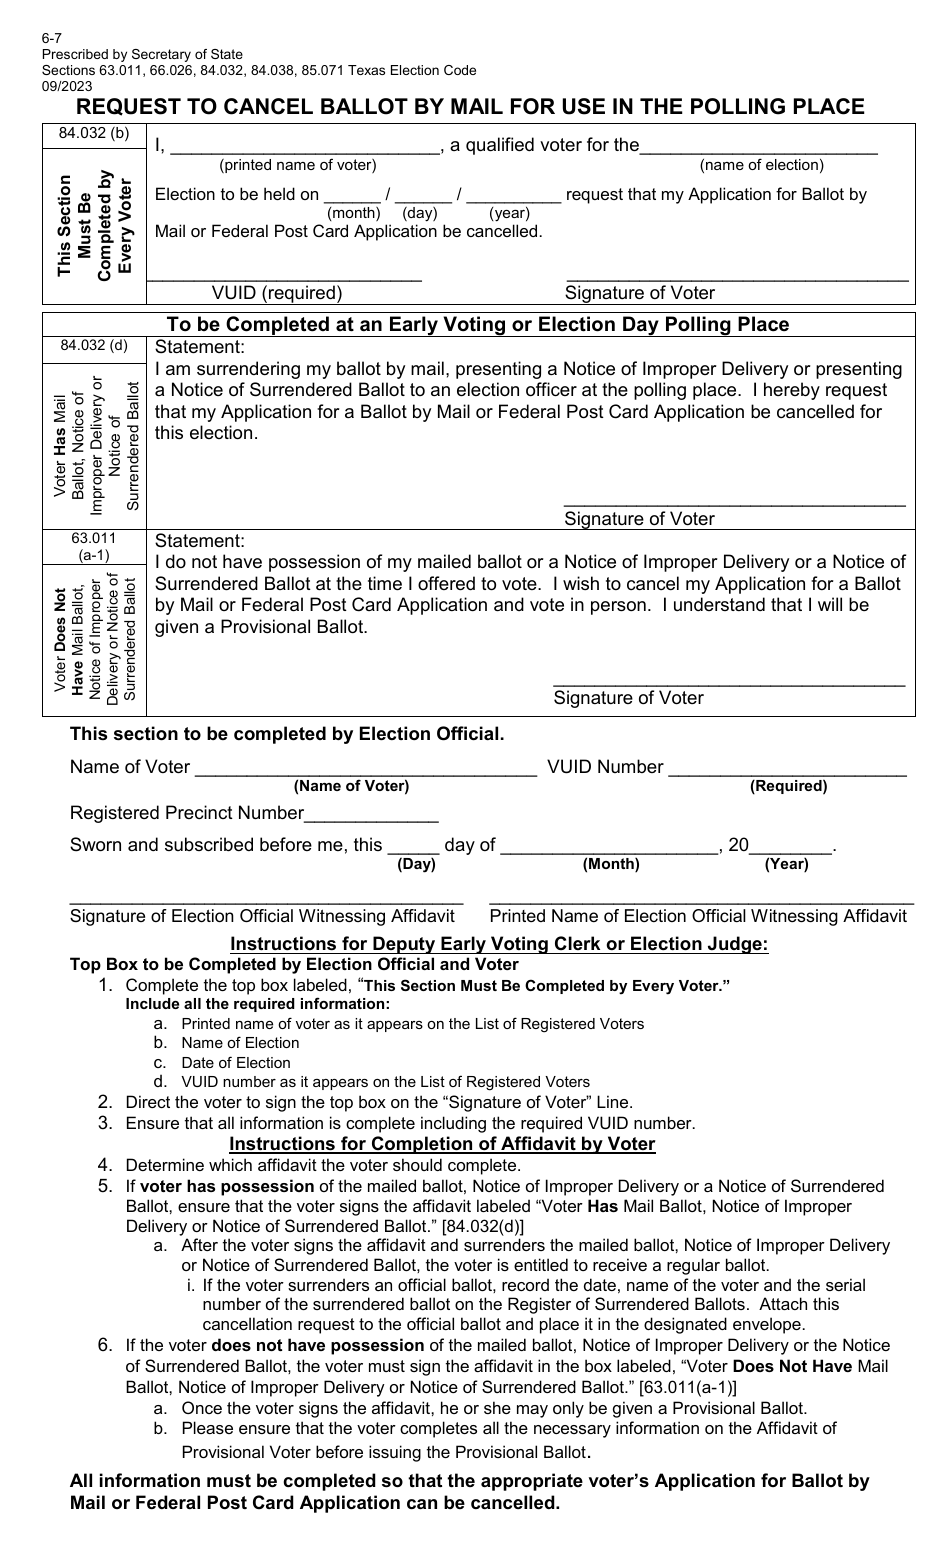 Form 6-7 Request to Cancel Ballot by Mail for Use in the Polling Place - Texas, Page 1